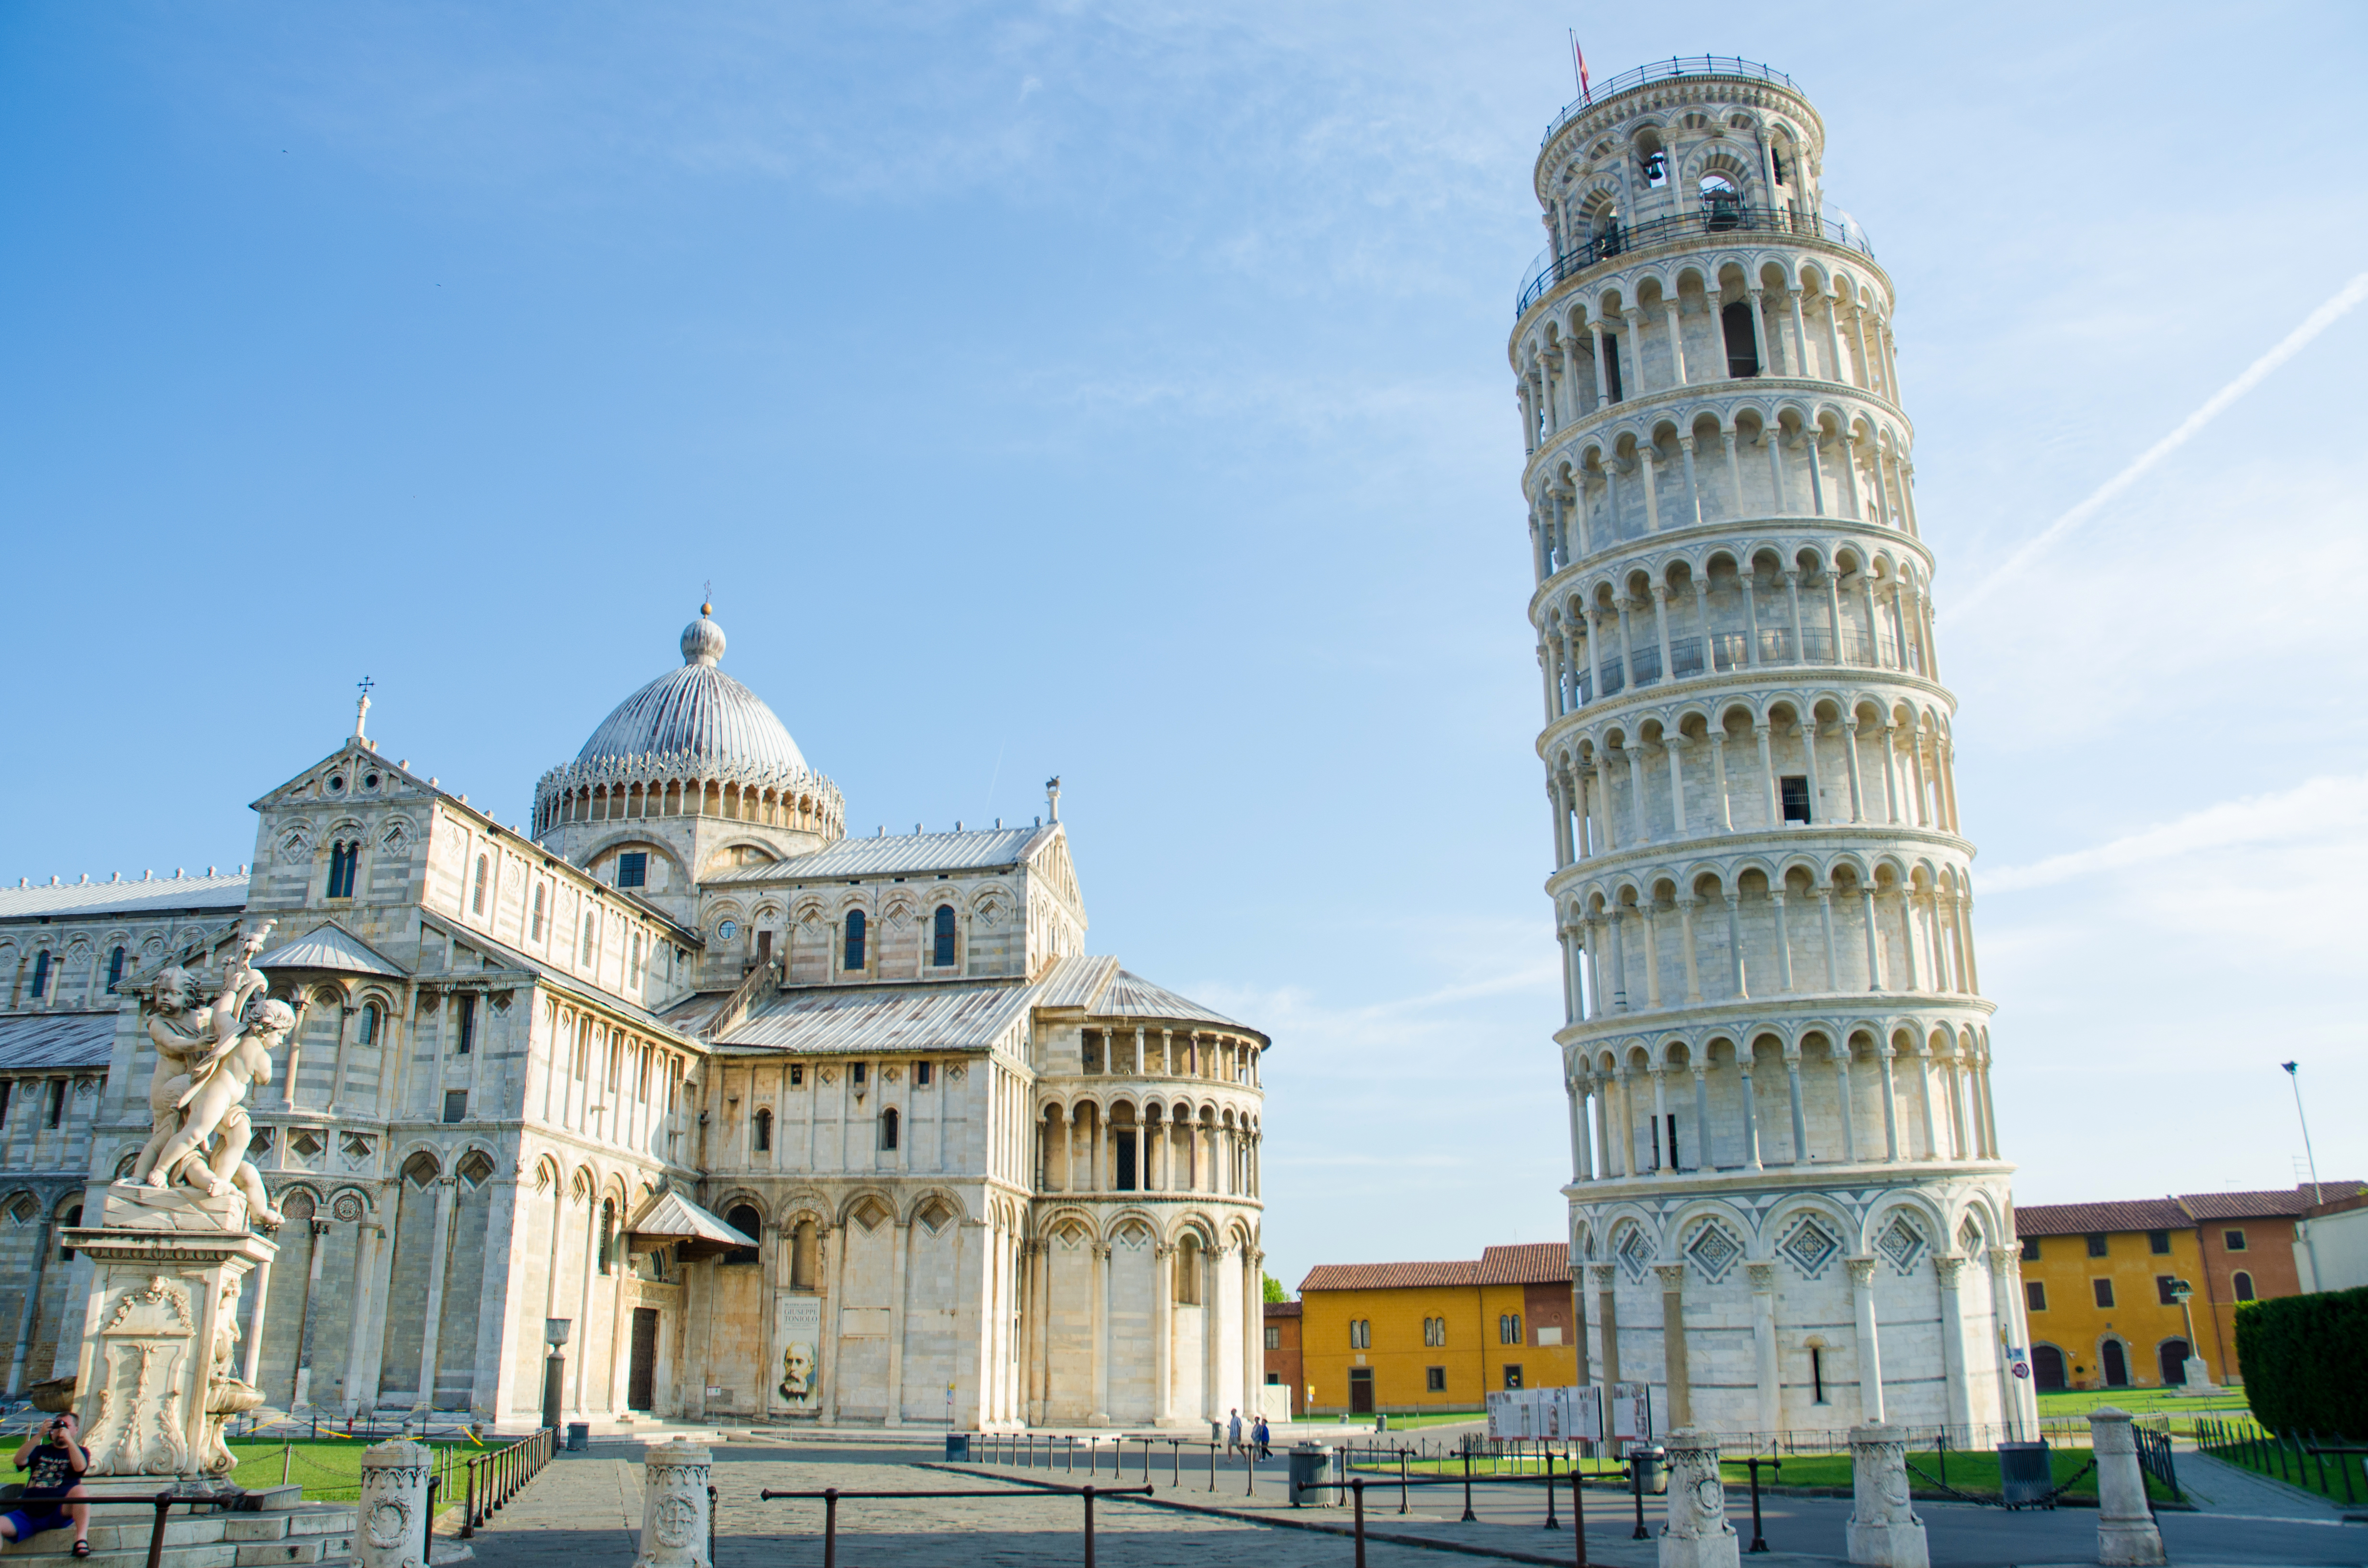 Picture of famous leaning tower of Pisa. Photo: Colourbox